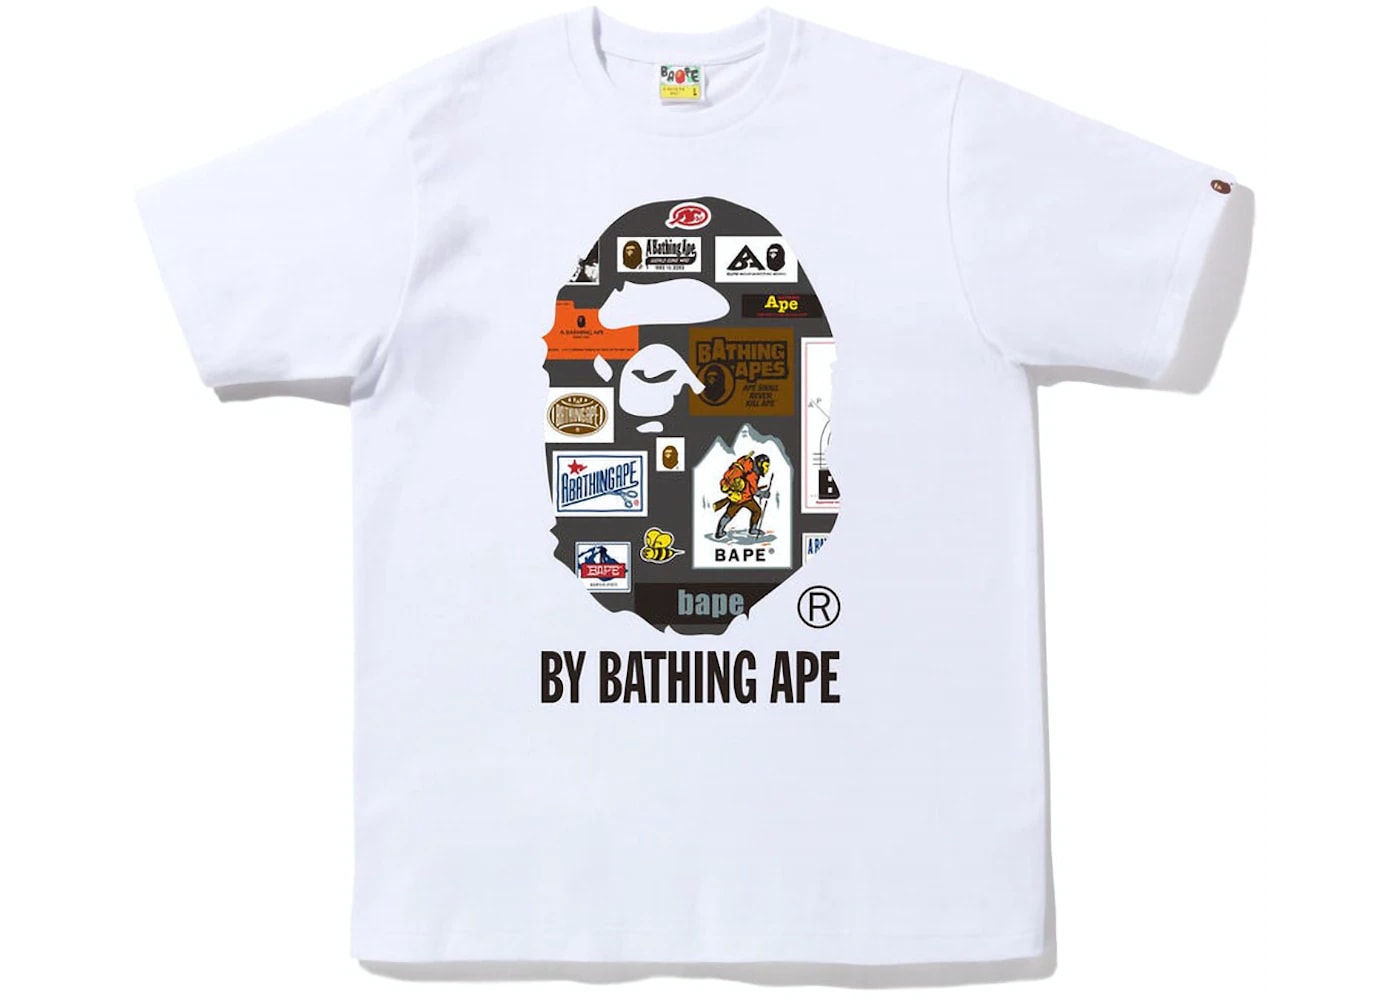 BAPE Multi Label By Bathing Ape Tee White – First Look SLC